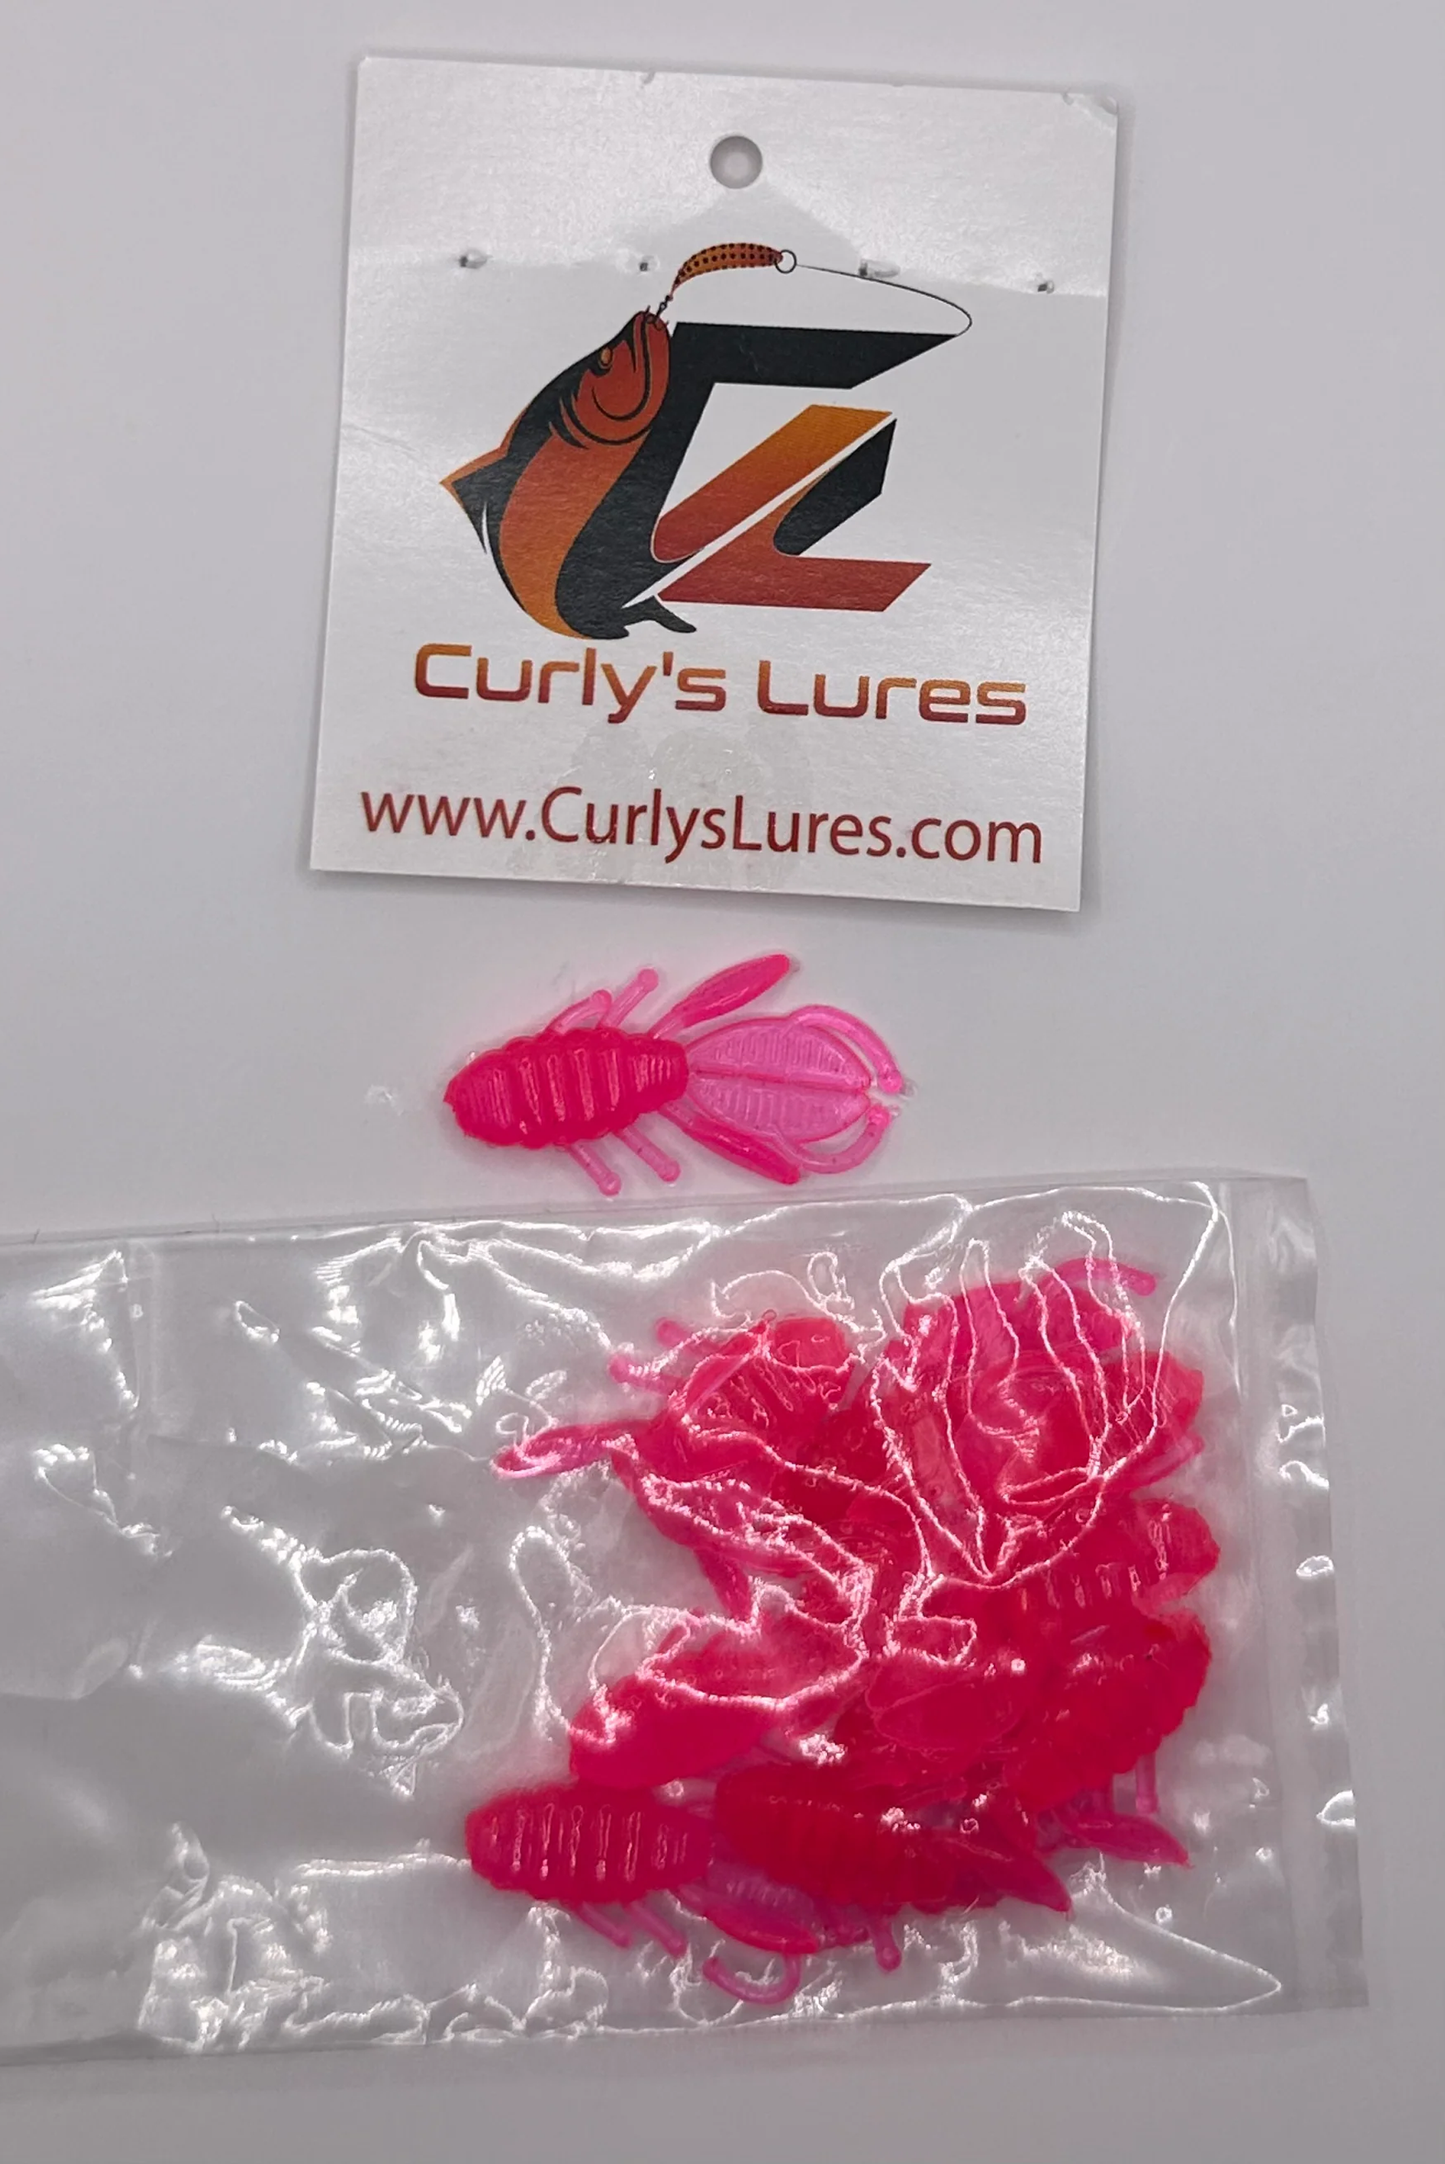 1.25” pink curly creature